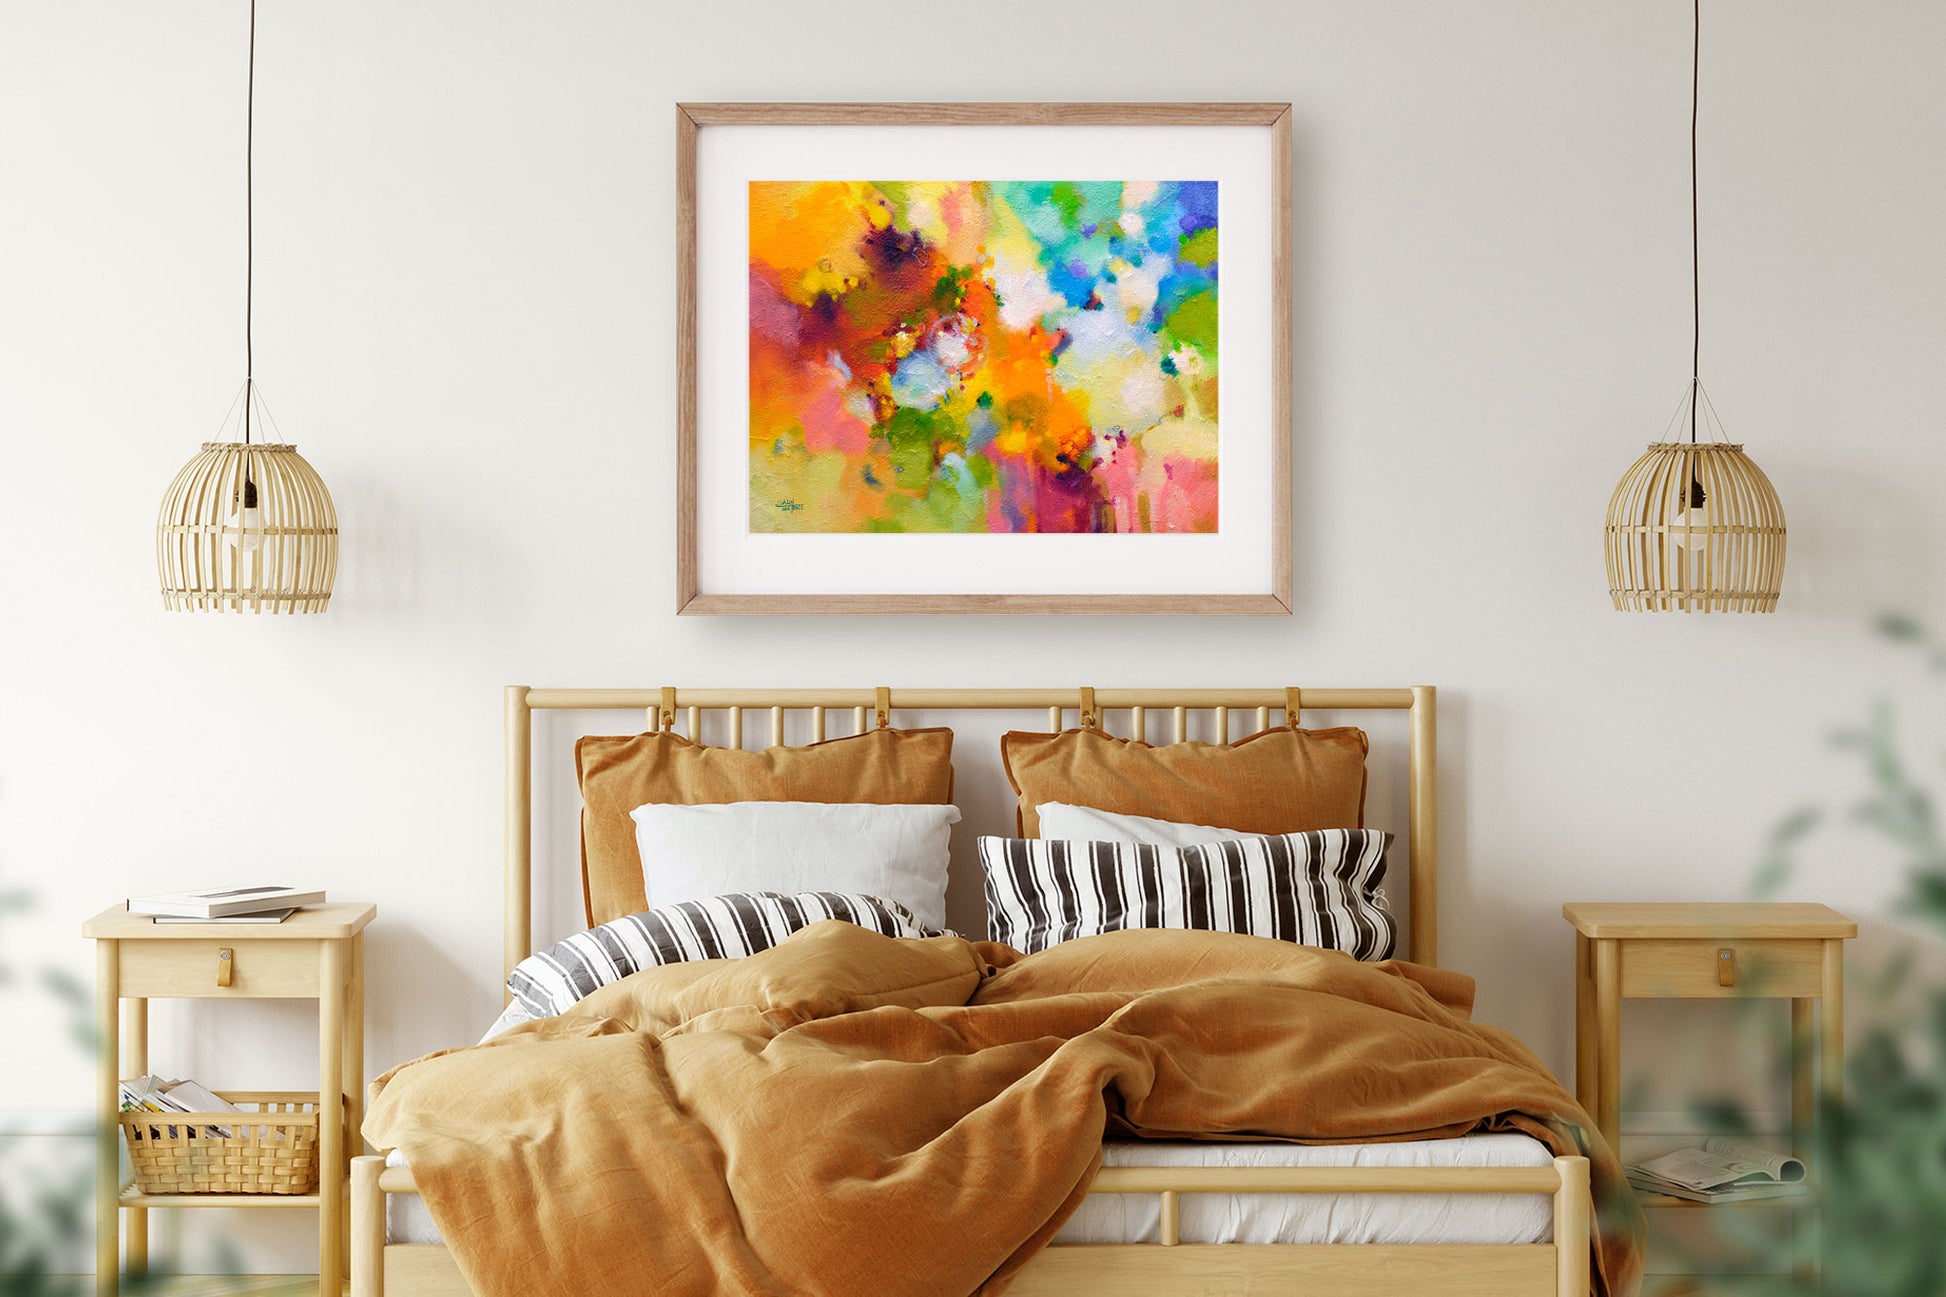 Beautiful wall art in the bedroom, Points of Reference, abstract giclee print from the original abstract painting by Sally Trace